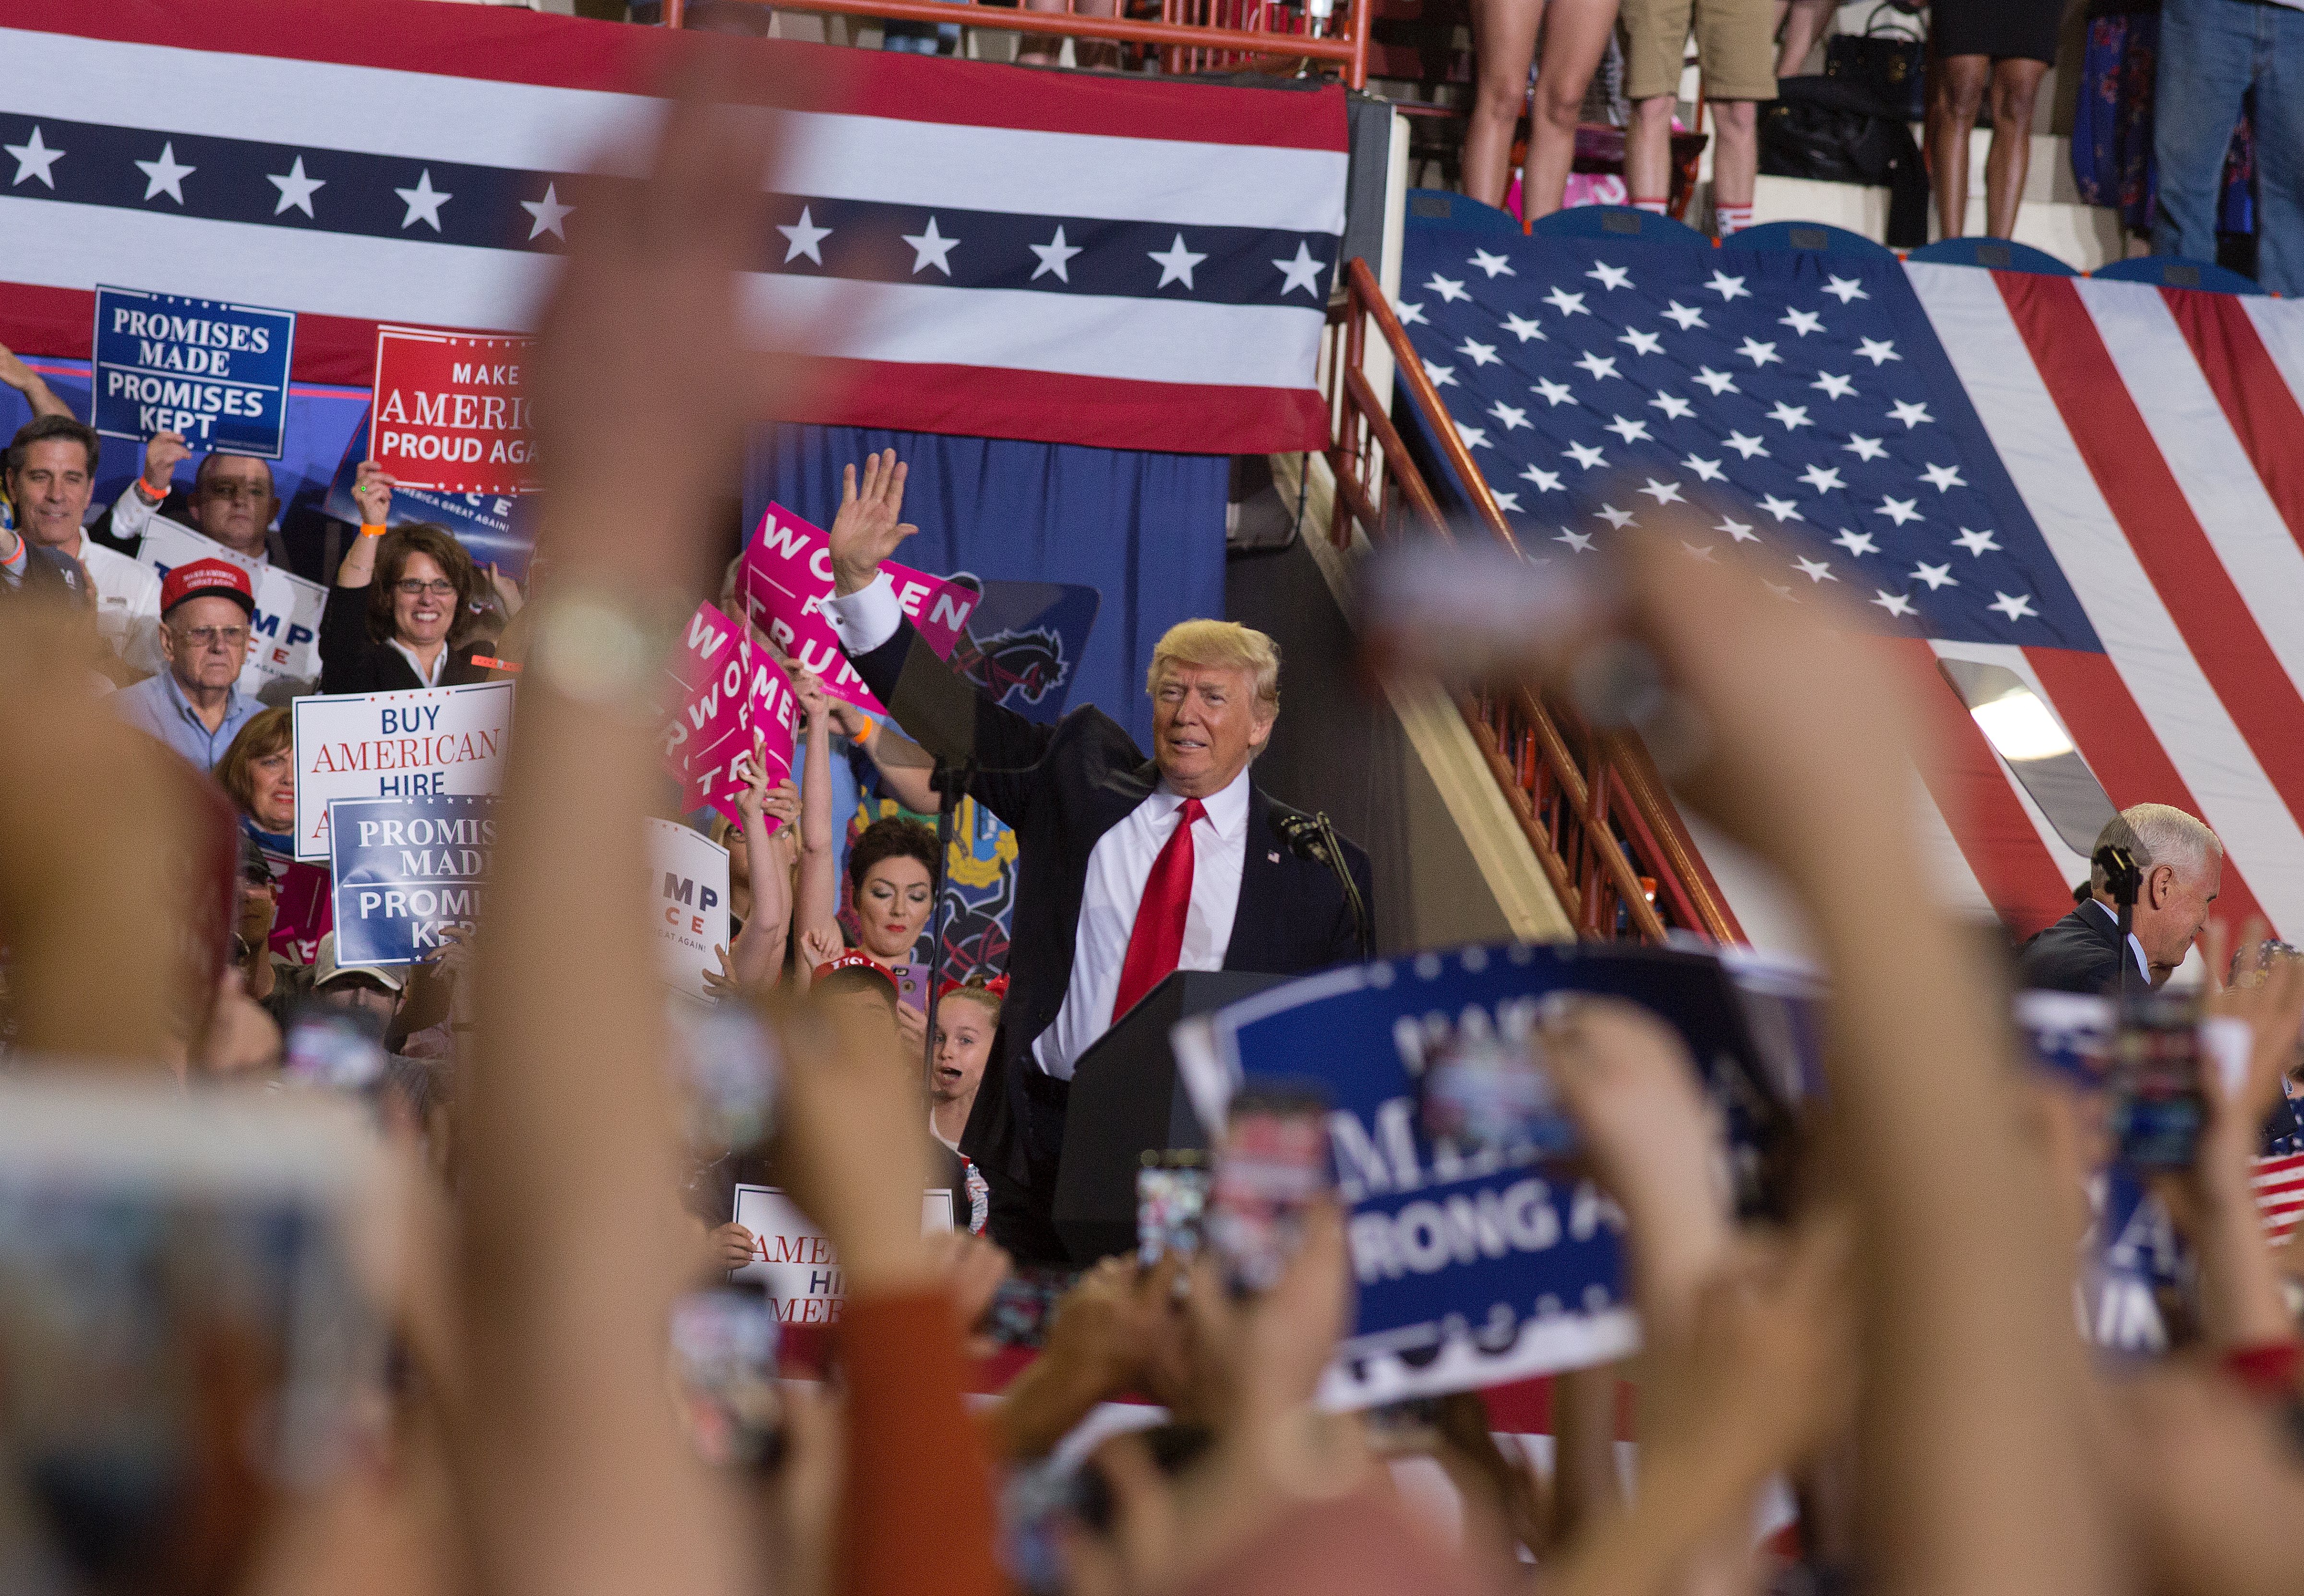 President Trump addresses an enthusiastic crowd of supporters at a rally on April 29, 2017 in Harrisburg, Pennsylvania. (Andrew Lichtenstein—Corbis via Getty Images)